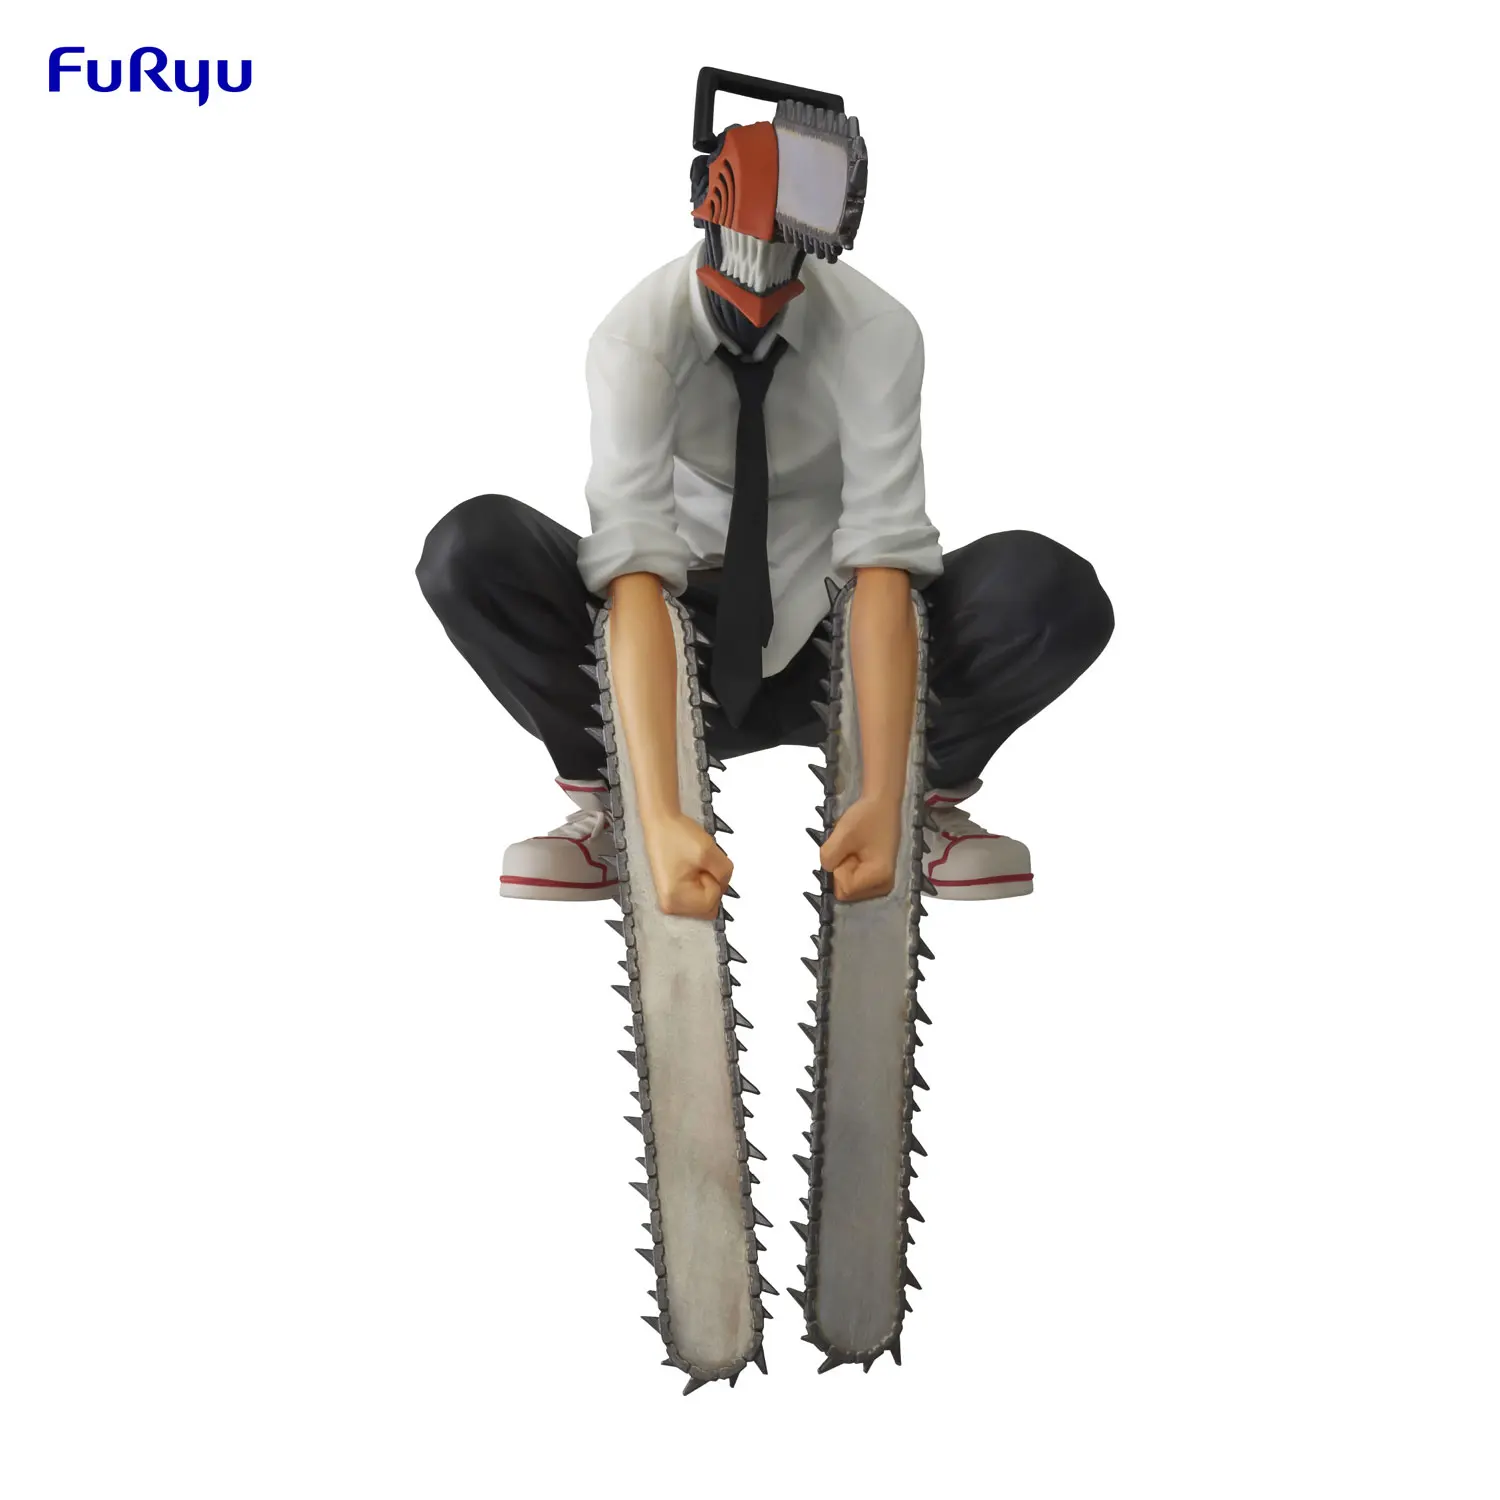 

In Stock Original FuRyu Chainsaw Man Sitting Ver Action Figure Collectible Model Toys For Birthday Gift